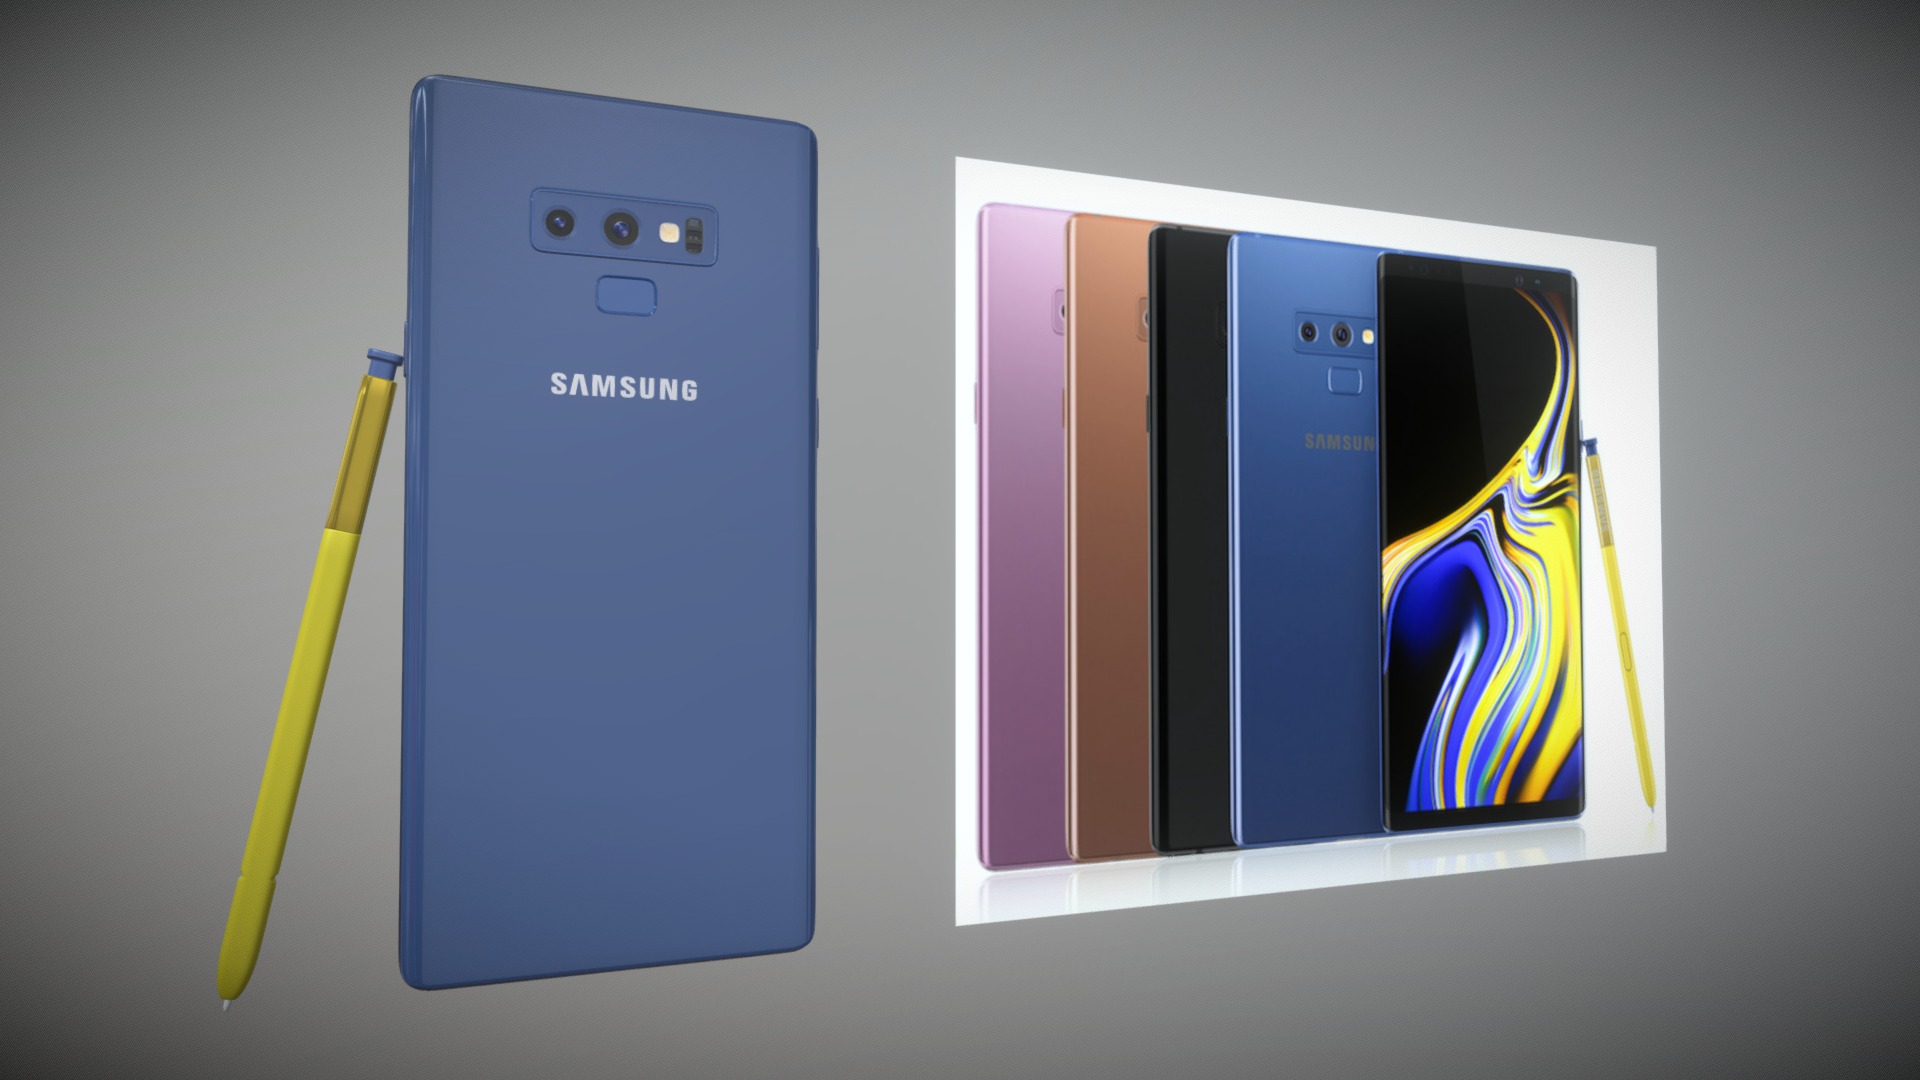 3D model Samsung GALAXY Note 9 all colors - This is a 3D model of the Samsung GALAXY Note 9 all colors. The 3D model is about a couple of cell phones.